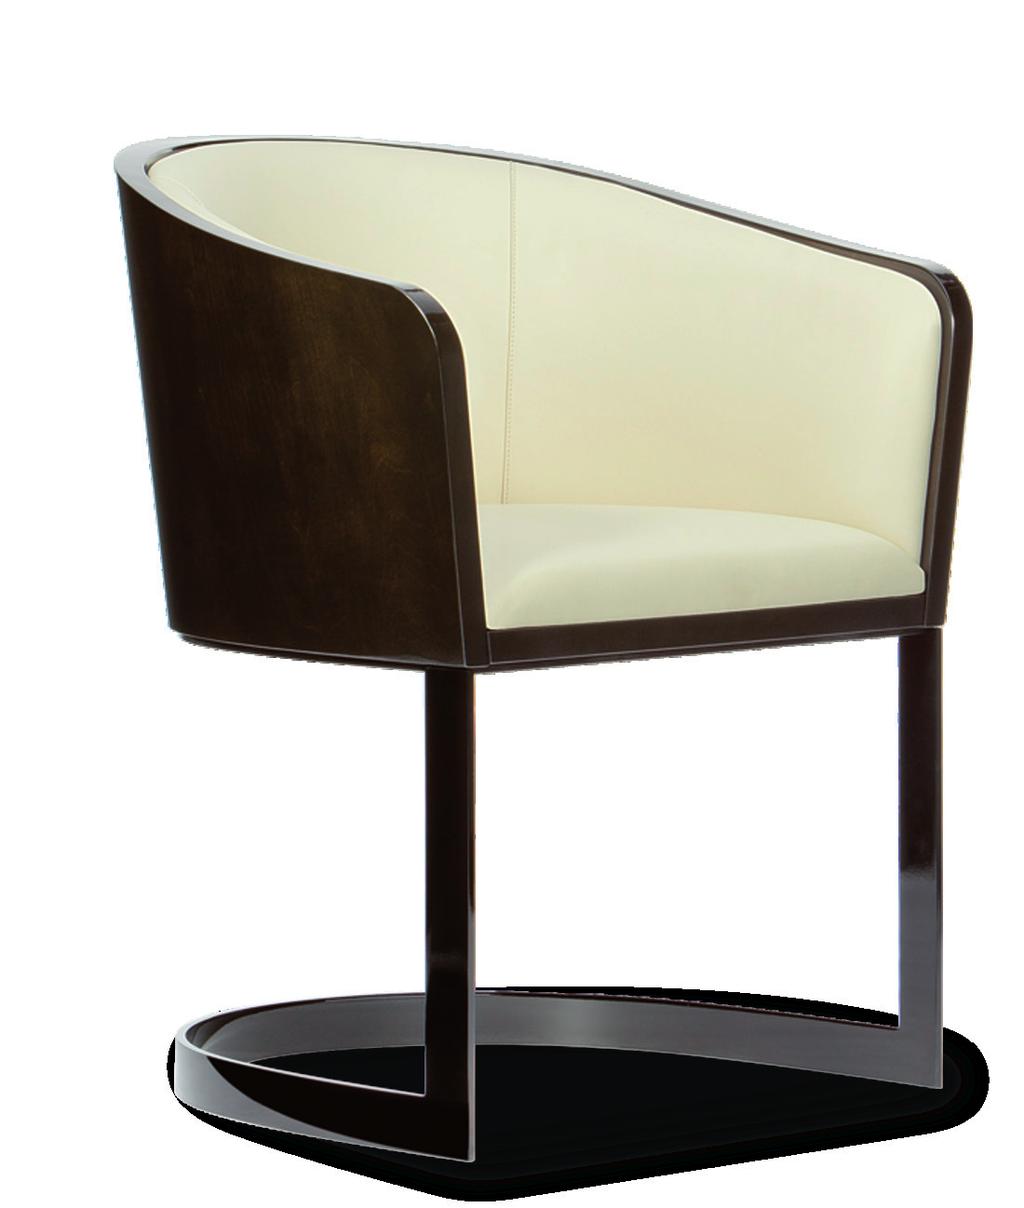 ANDROMEDA Small upholstered chair with Brushed Brown Oak feet.